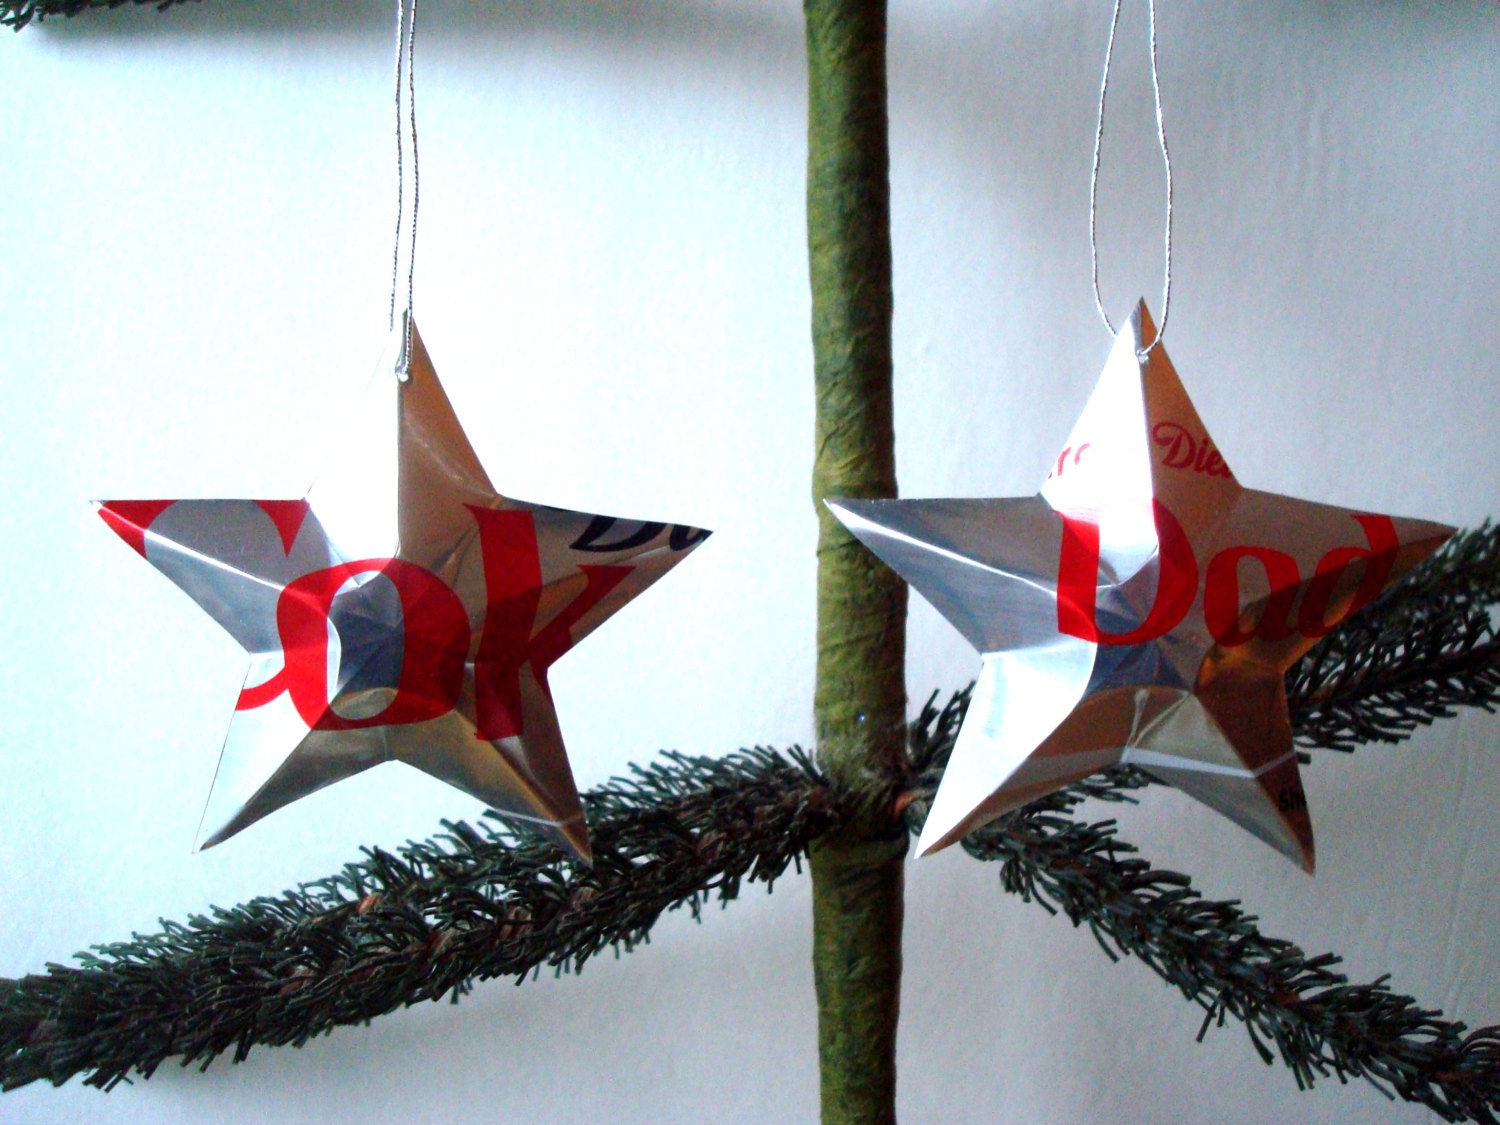 Share A Diet Coke With Dad Soda Can Stars - 2 Handmade Christmas Ornaments or Gift Toppers From Recycled Soda Cans